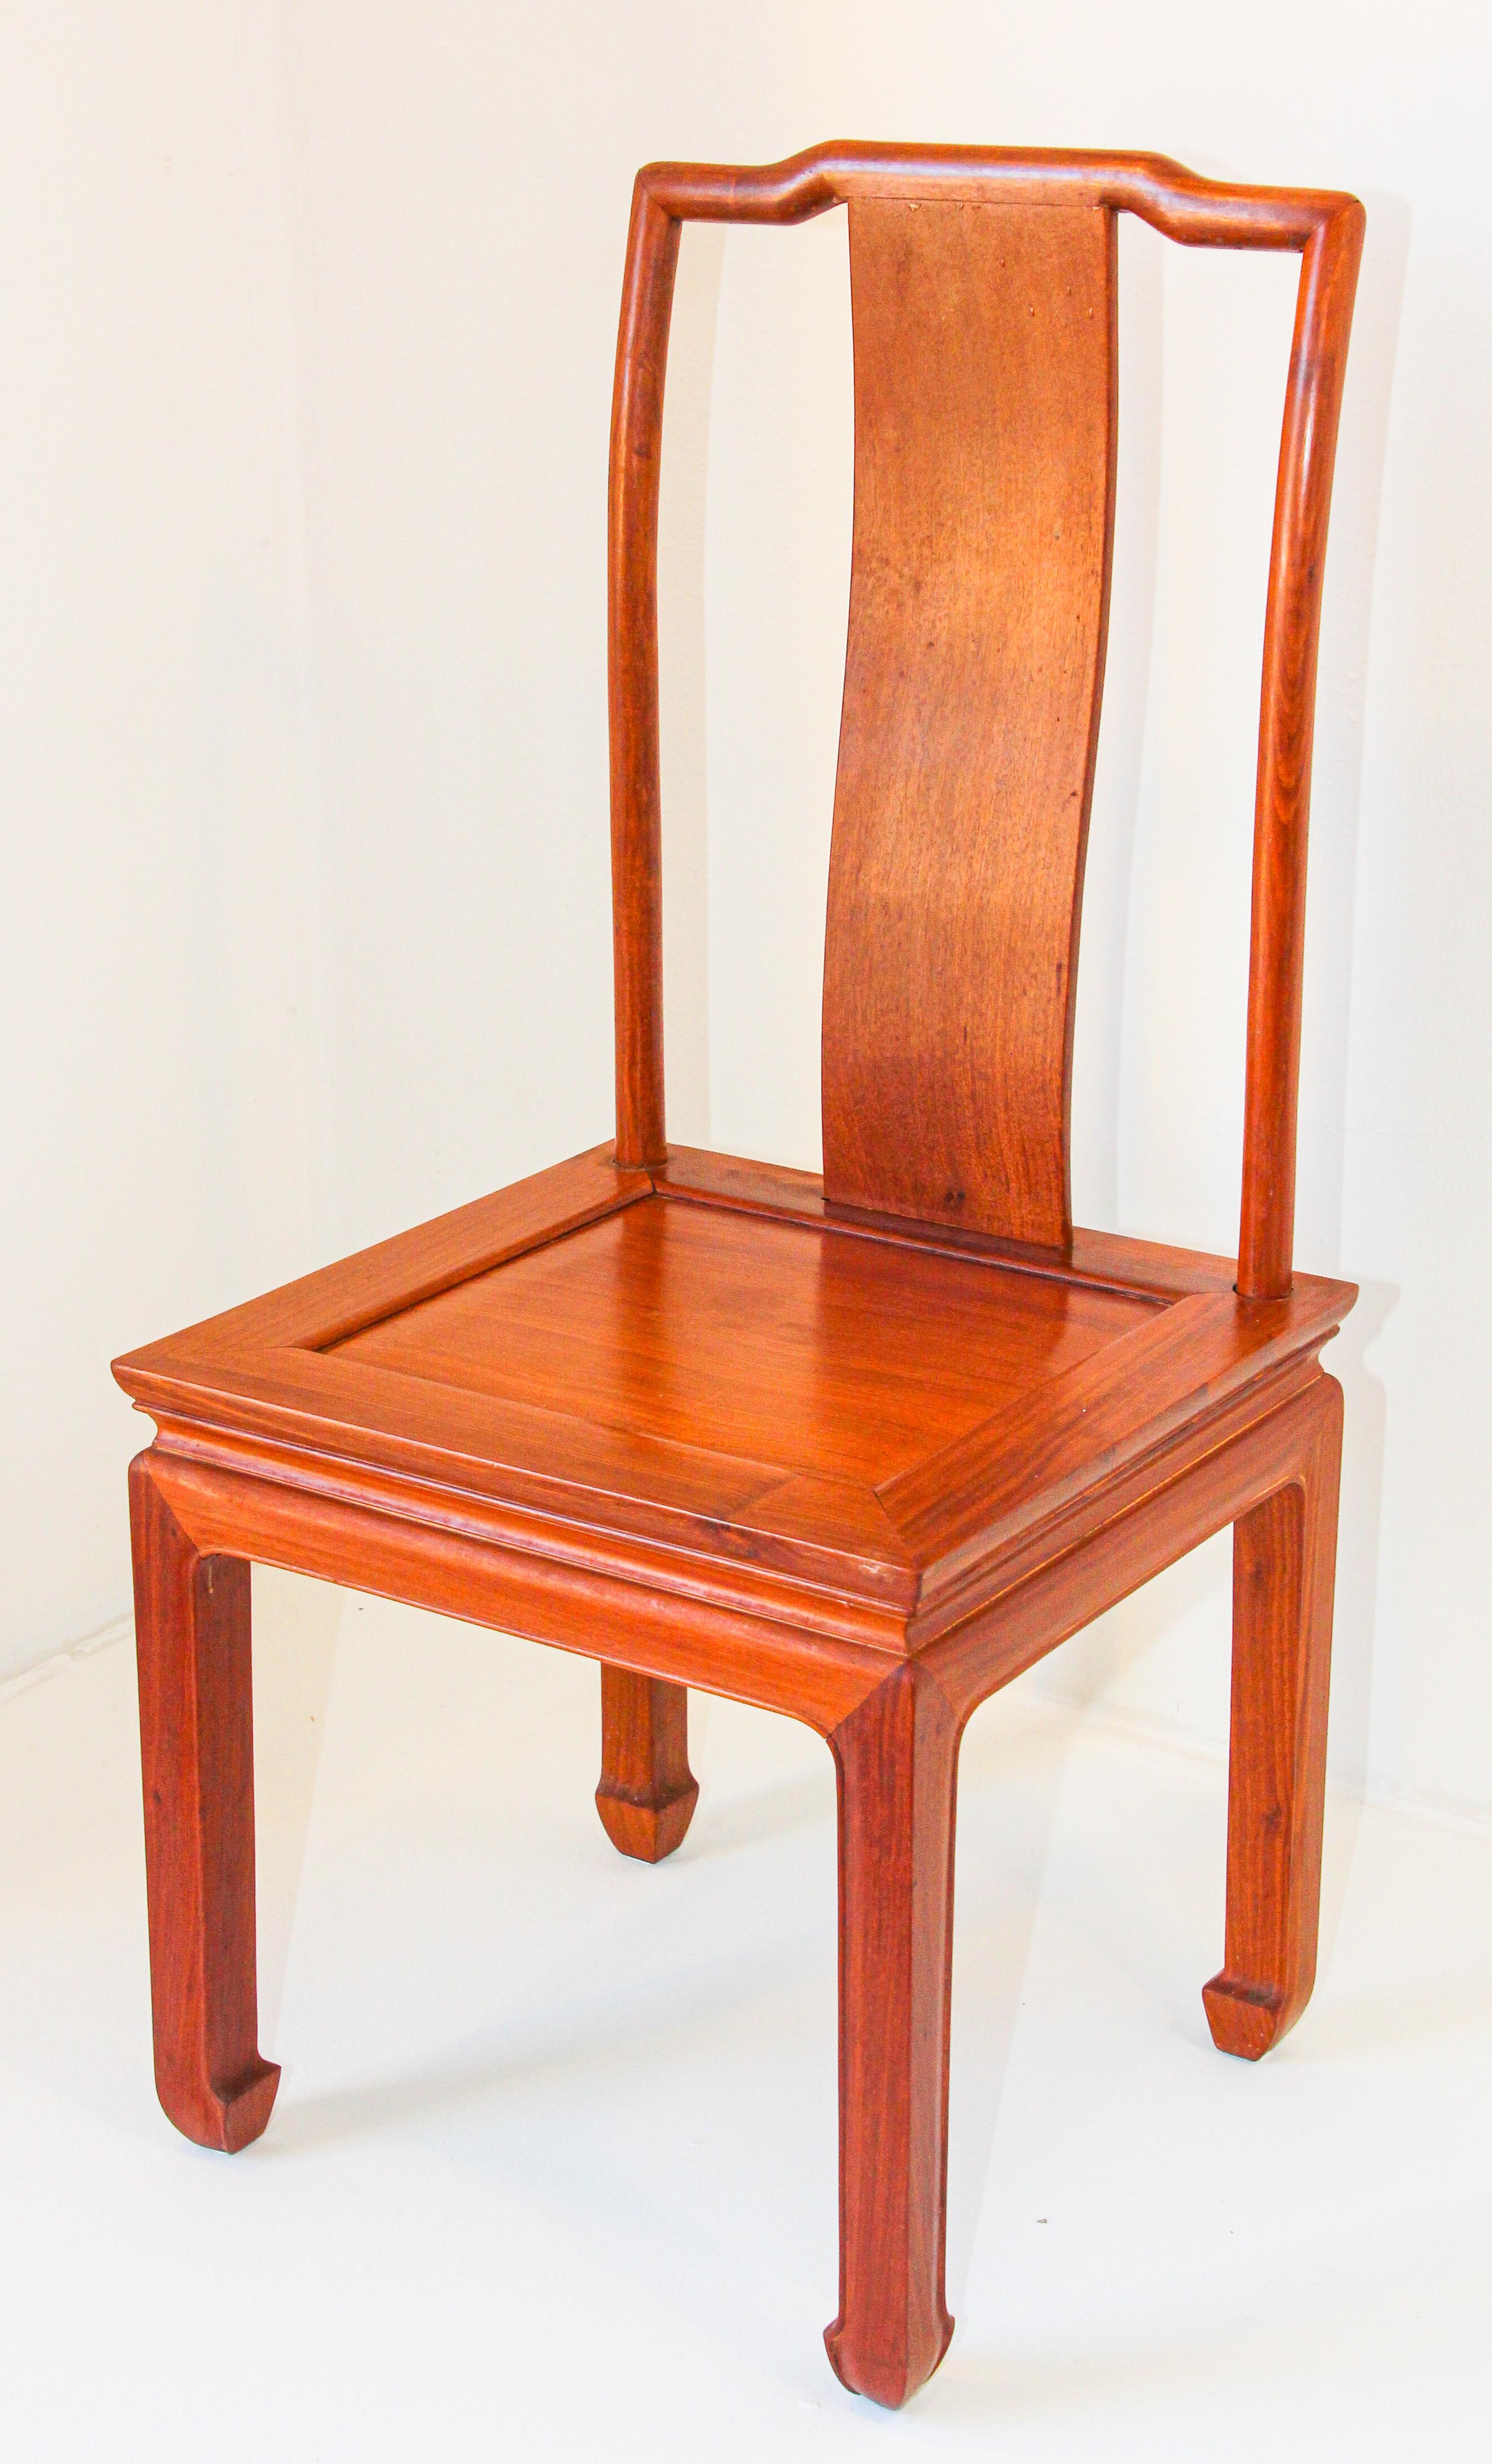 Vintage Asian Chinese Ming style side chair in solid wood.
Handcrafted in Hong Kong.
Great to use as en entry chair, side chair or office chair.
Very good condition.